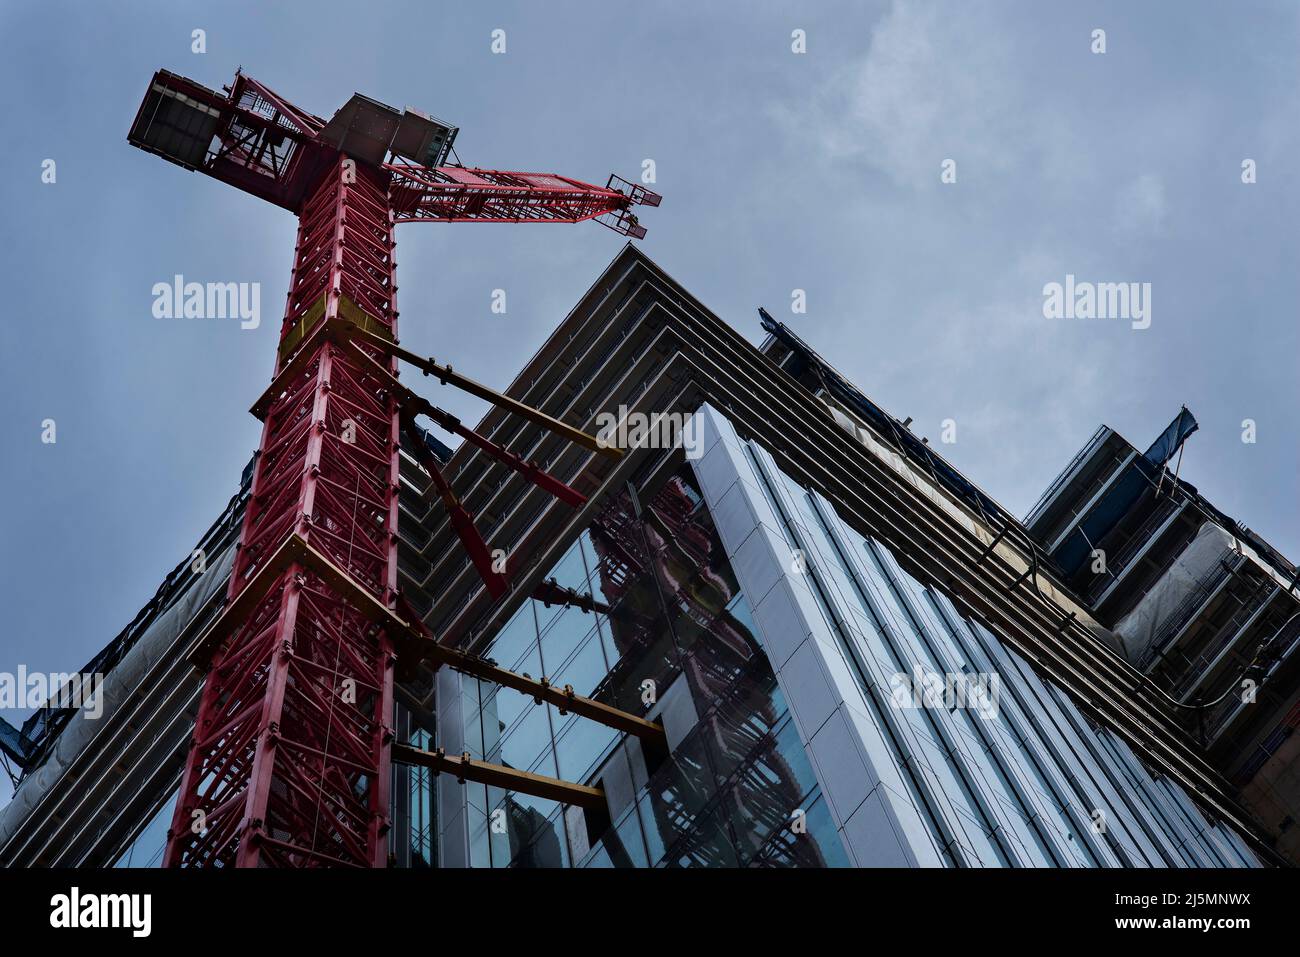 Tower crane attached to the tower block under construction. Building industry. Health and safety. Worksite safety. Stock Photo